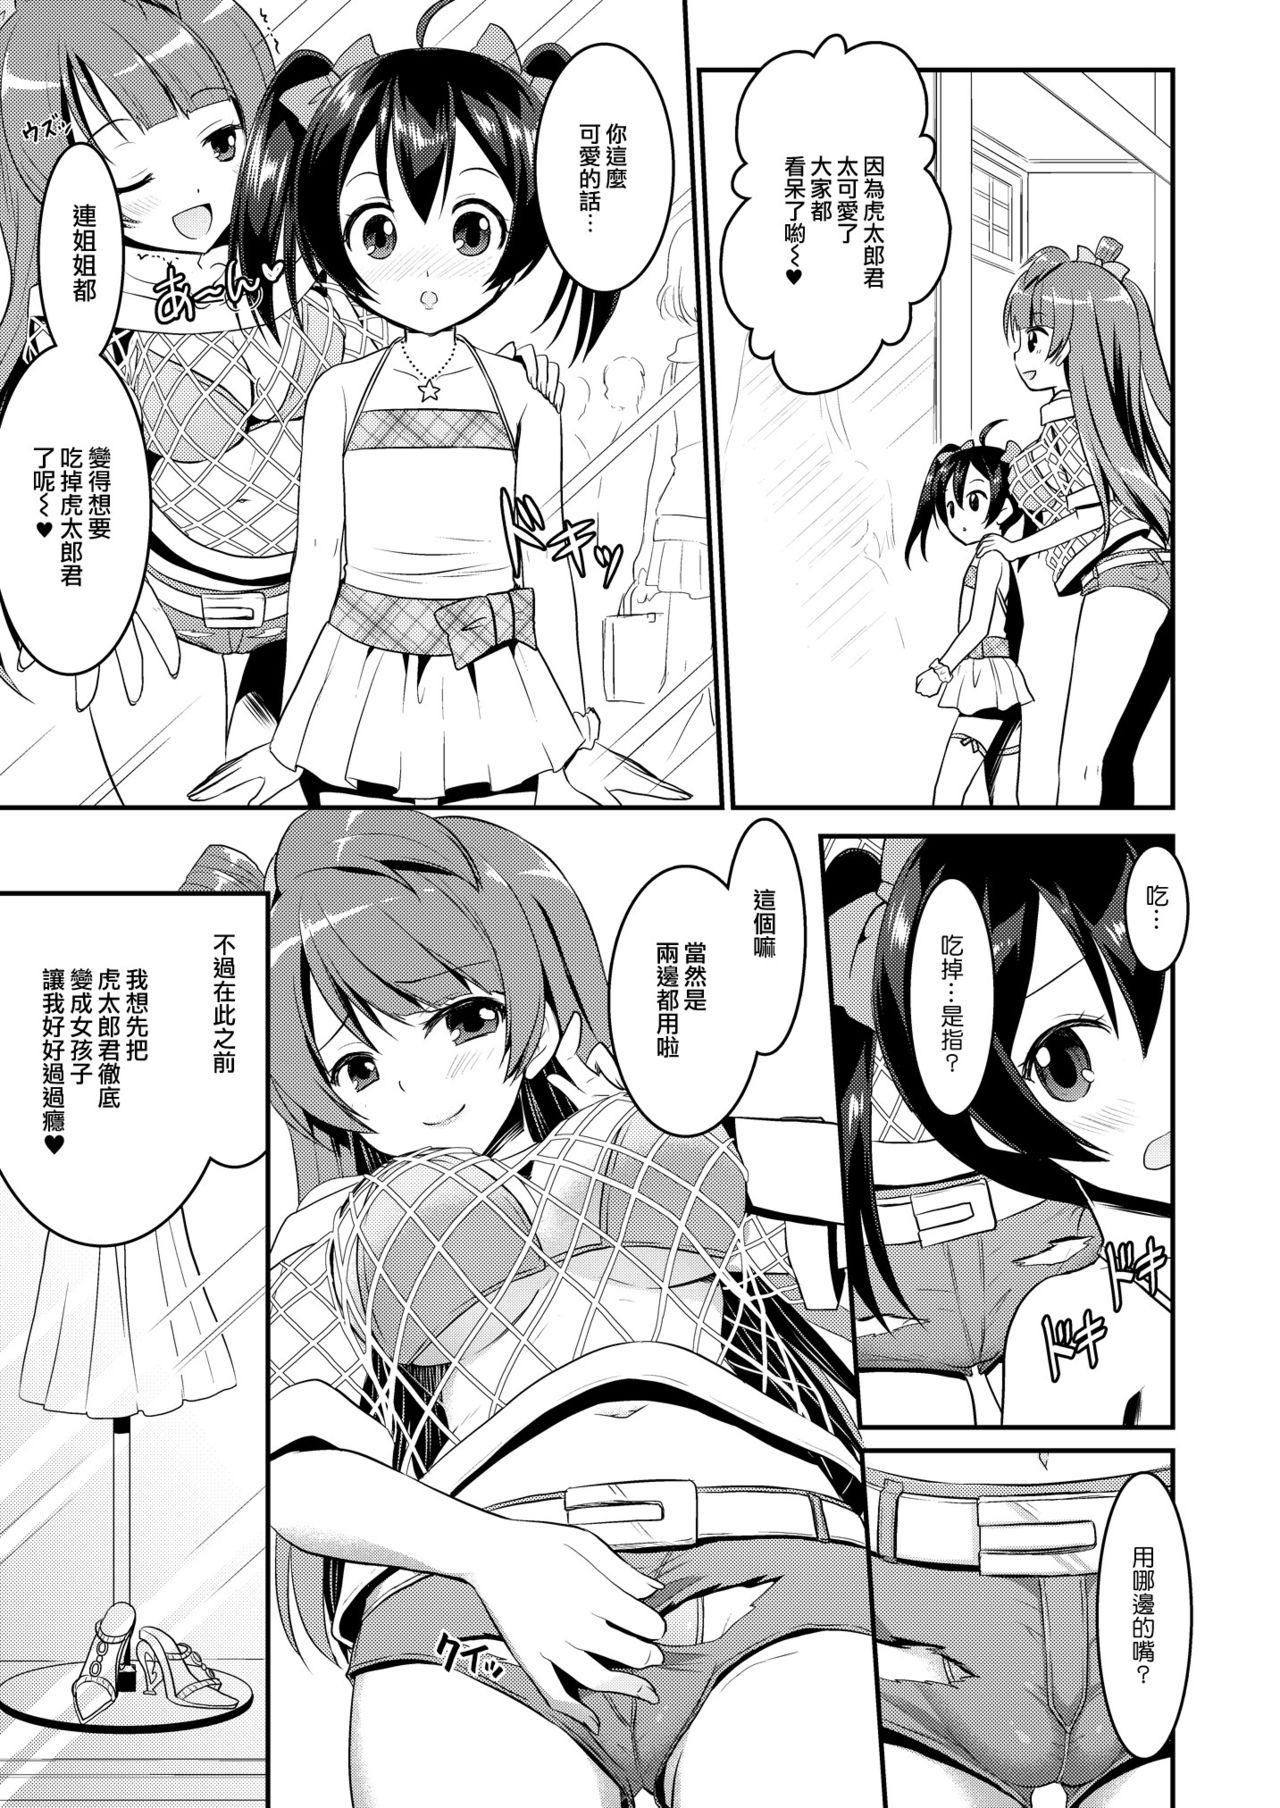 Sub Eat Meat Girl 4 - Love live Mamada - Page 9